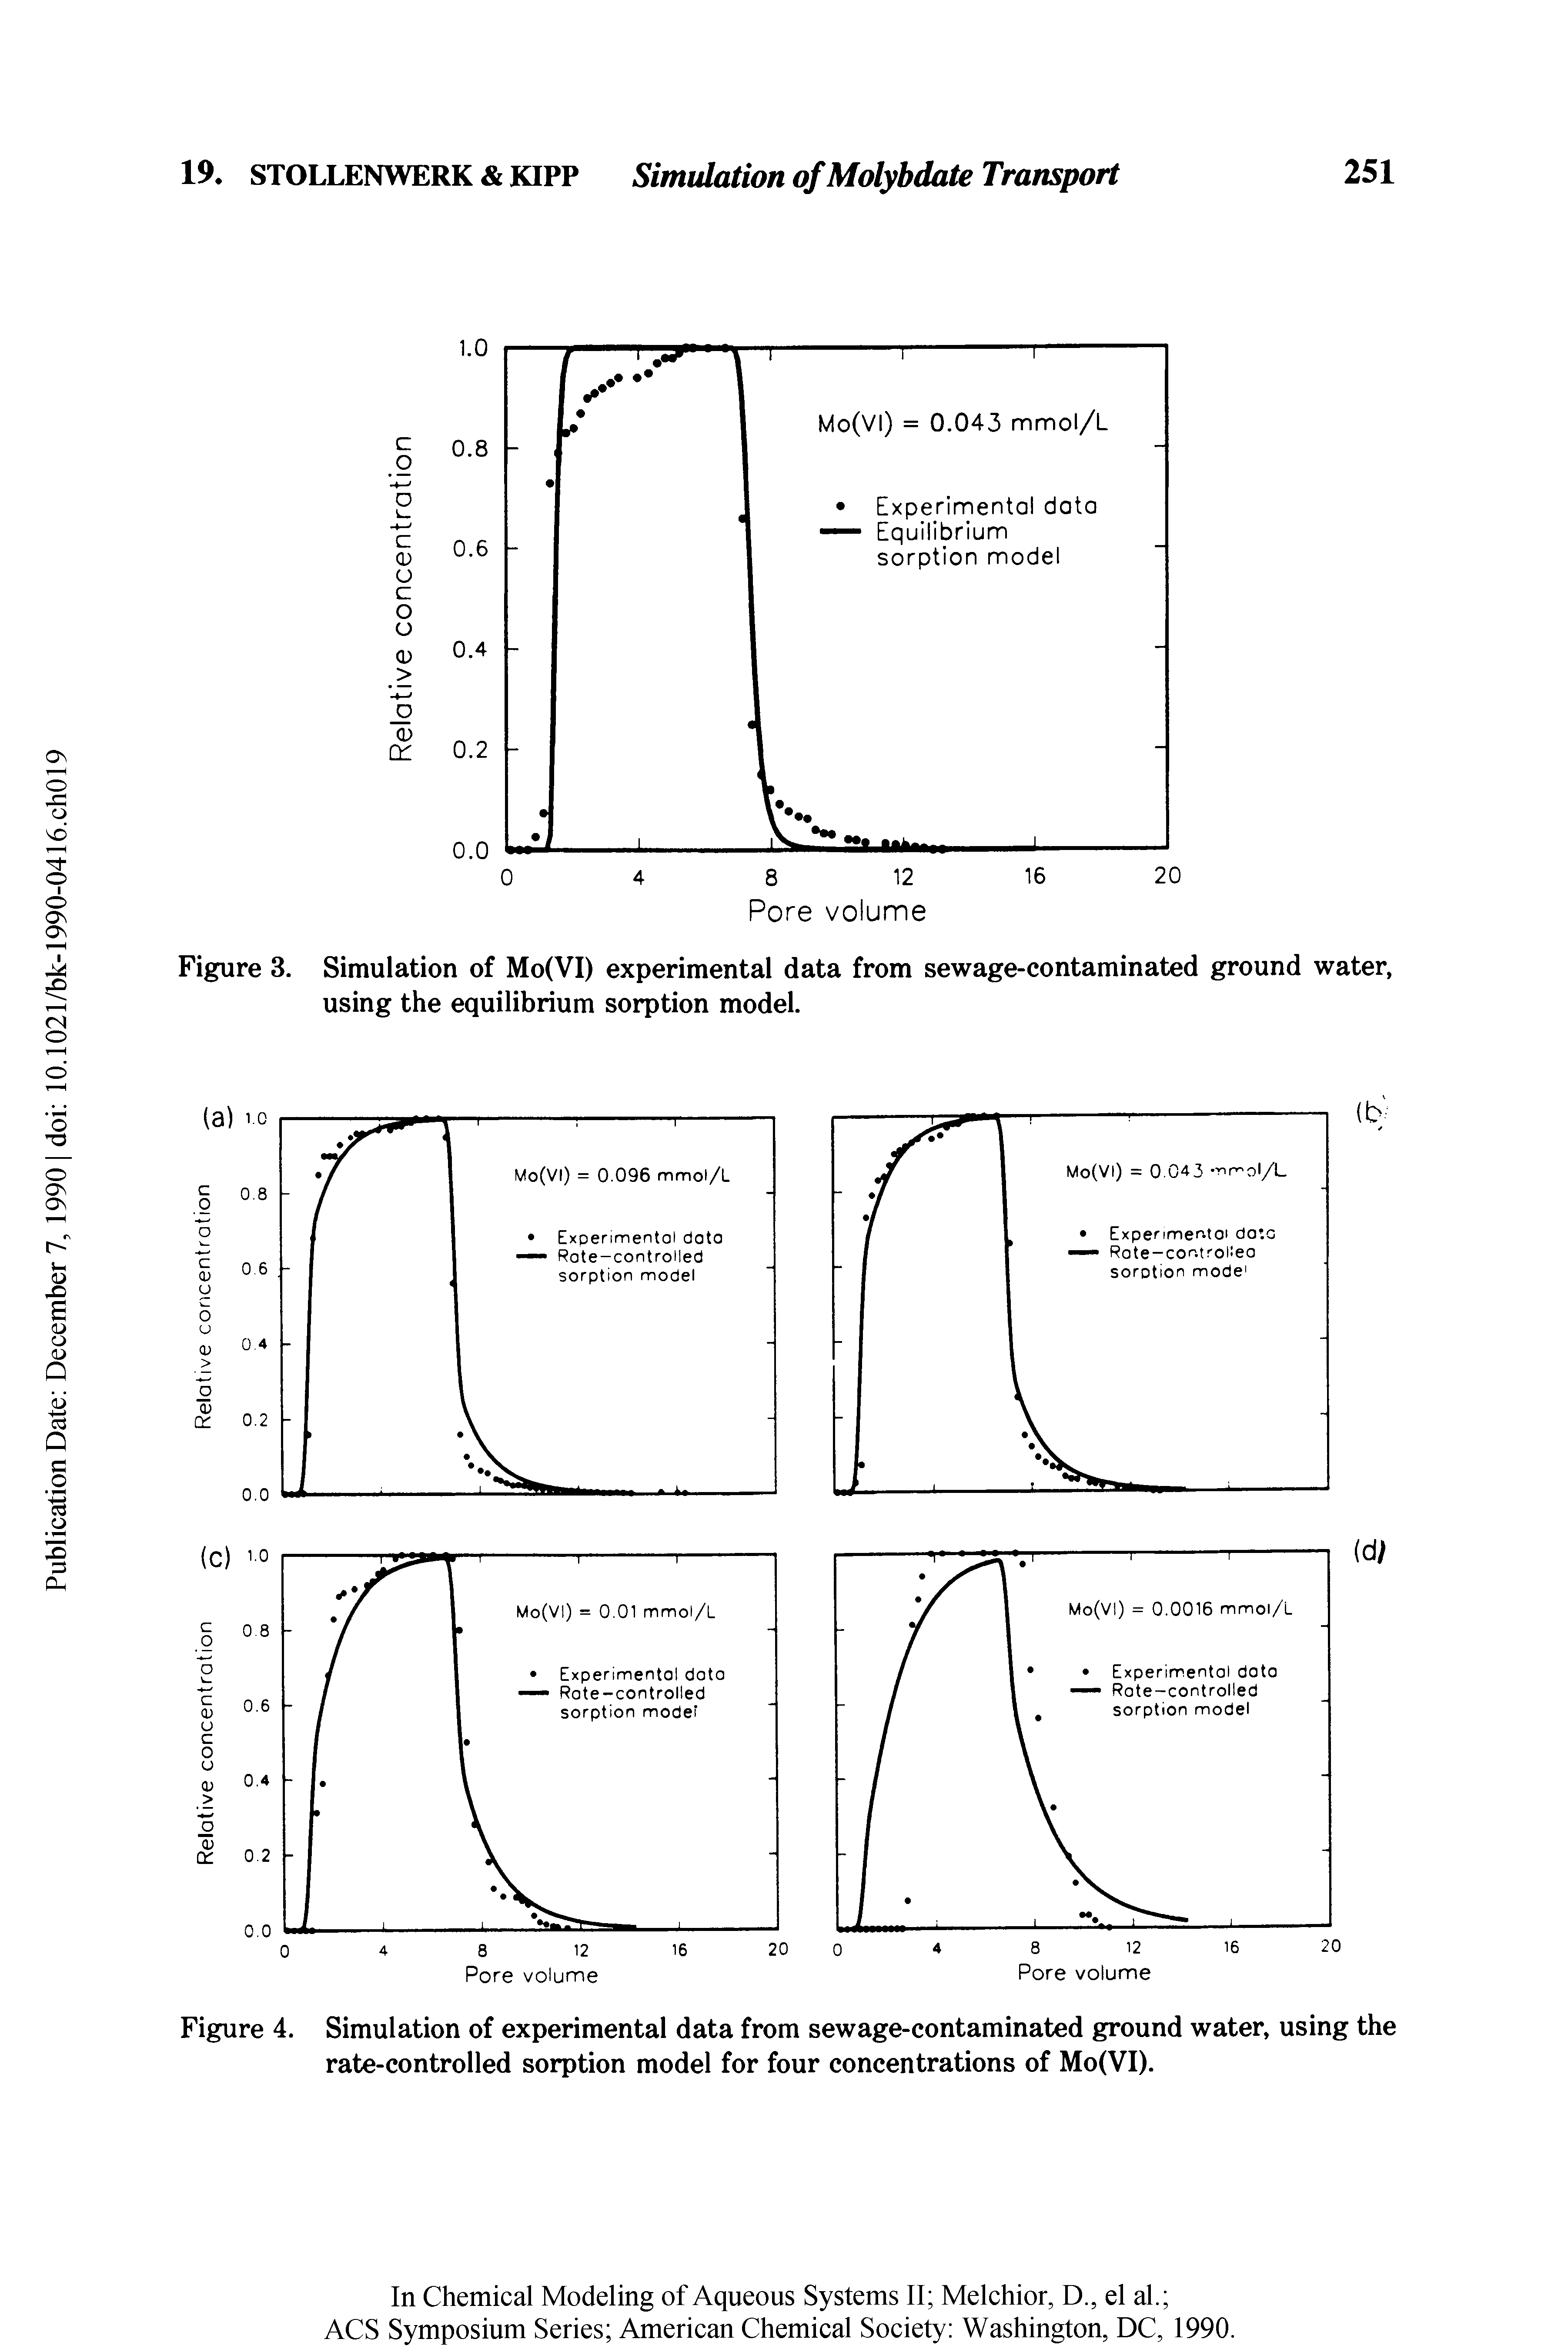 Figure 3. Simulation of Mo(VI) experimental data from sewage-contaminated ground water, using the equilibrium sorption model.